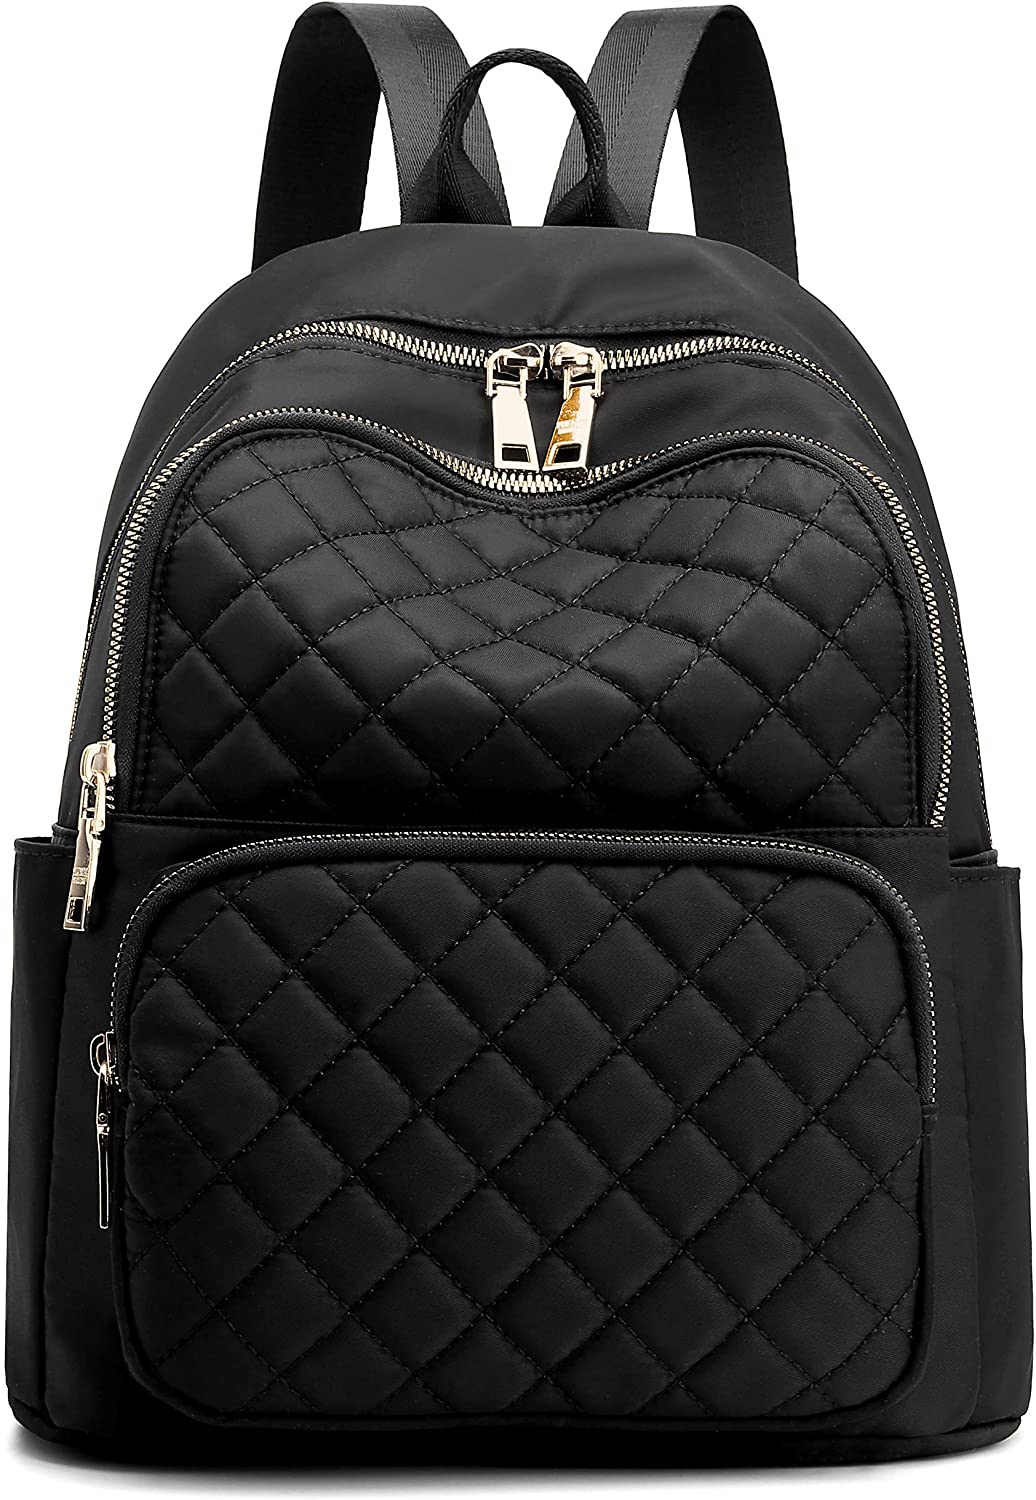 767-BL Large Back Entry Backpack in Black Nylon with Fabric Accent –  GreatBags & Maple Leather